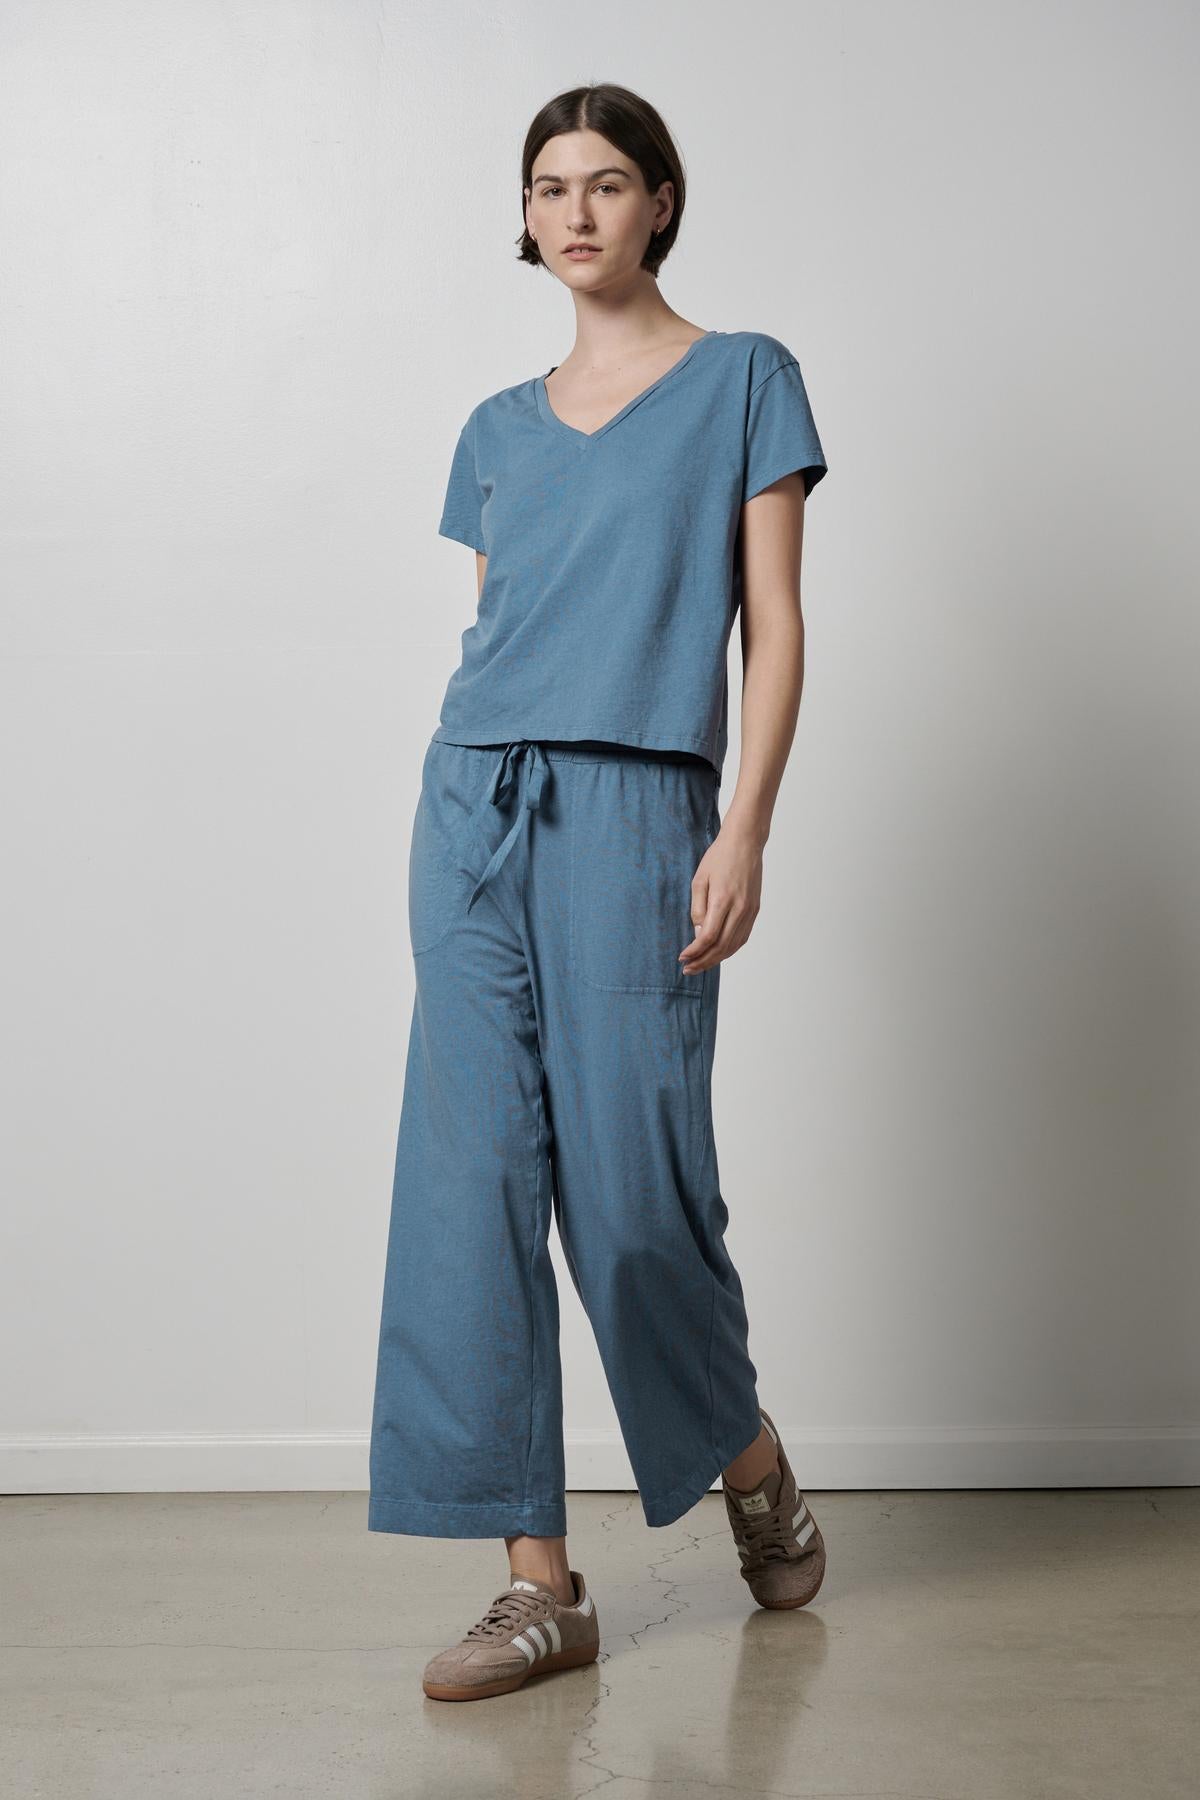 A woman wearing a Velvet by Jenny Graham organic cotton blue jumpsuit and sneakers with 90s silhouettes.-35495940882625